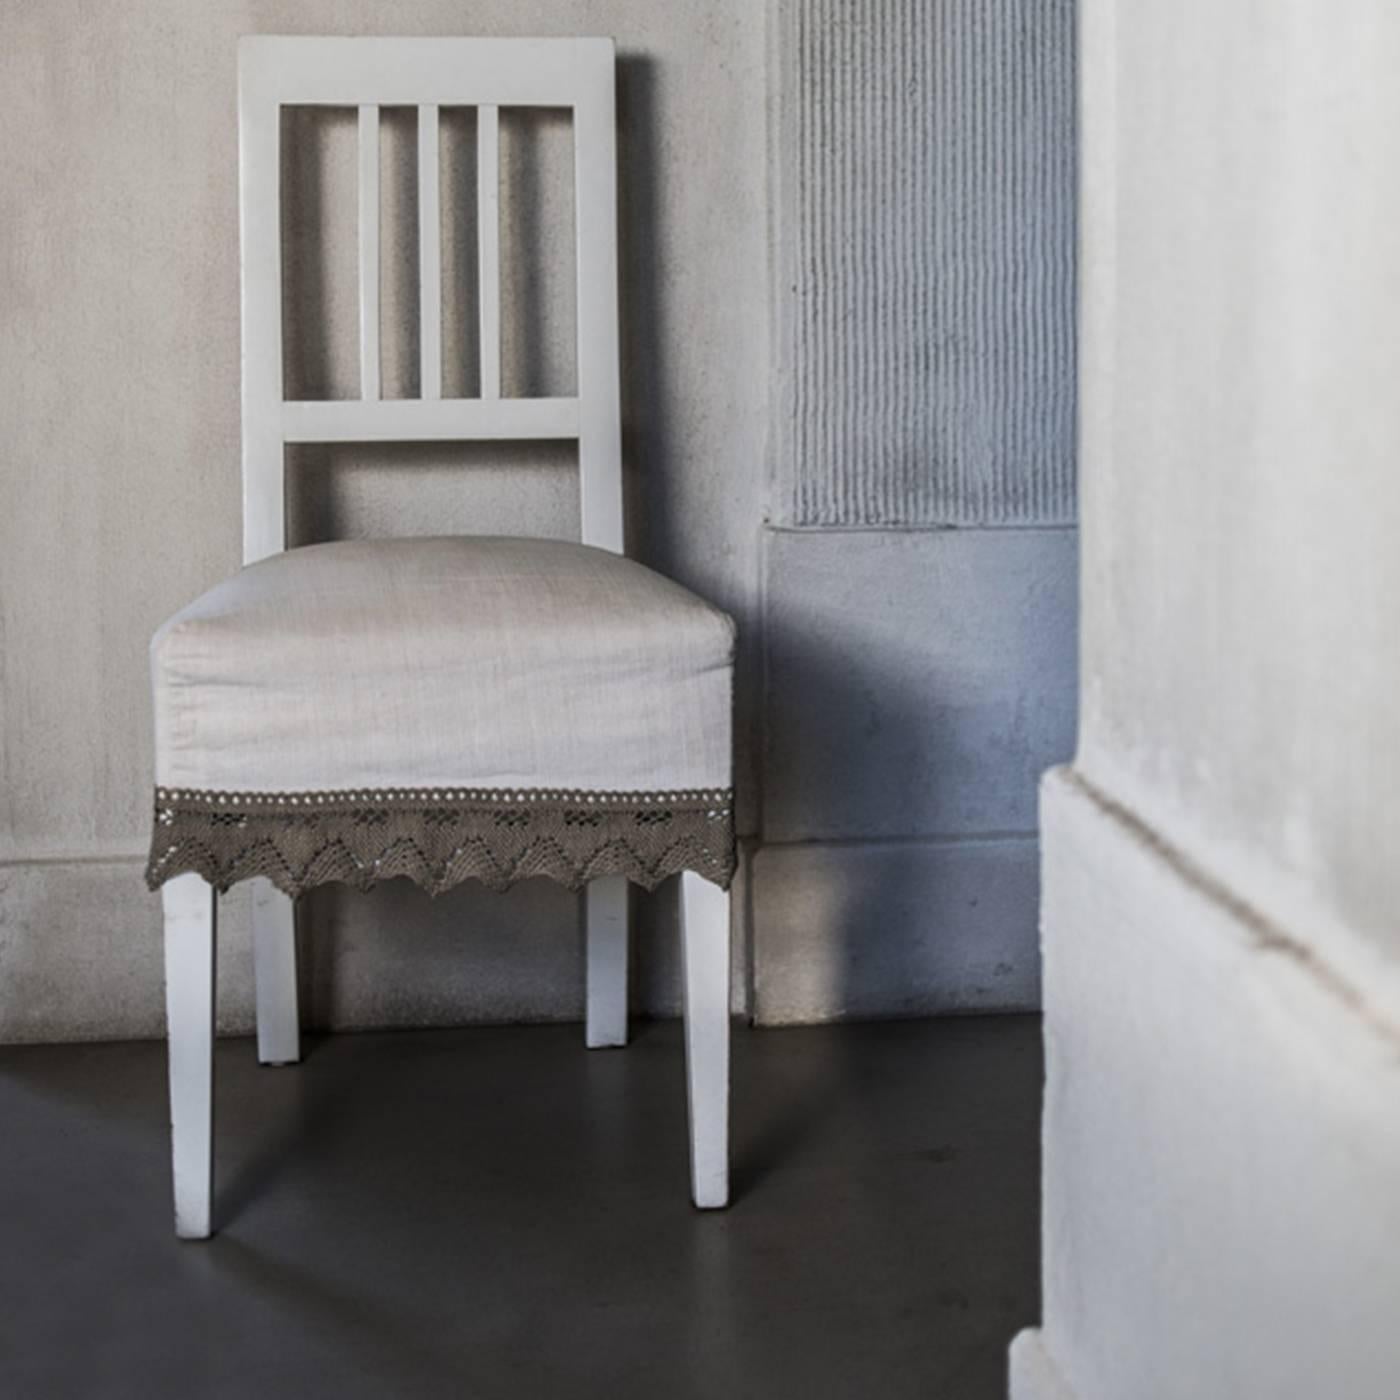 Elegant and sophisticated this set of four chairs is a modern interpretation of the traditional Silhouette and charming designs of the end of the 19th century. Its simple structure was made entirely of beechwood and varnished in white with a brush